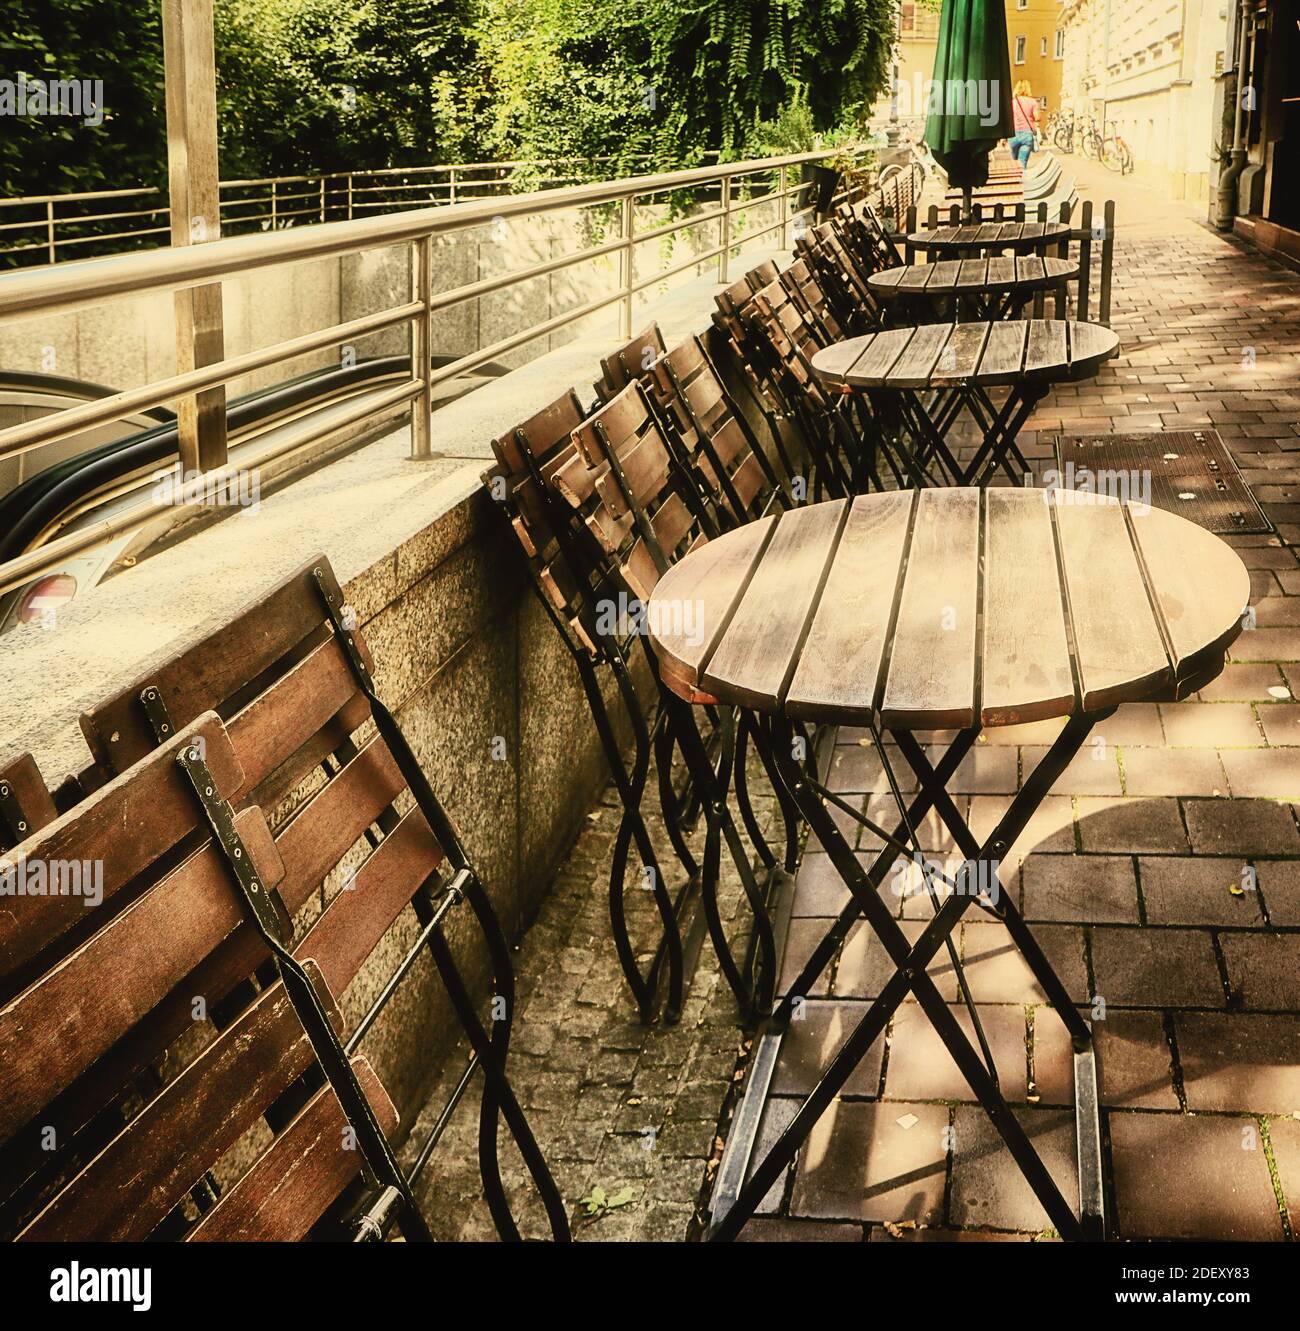 Lockdown, empty tables and chairs in front of a coffee bar on the sidewalk Stock Photo